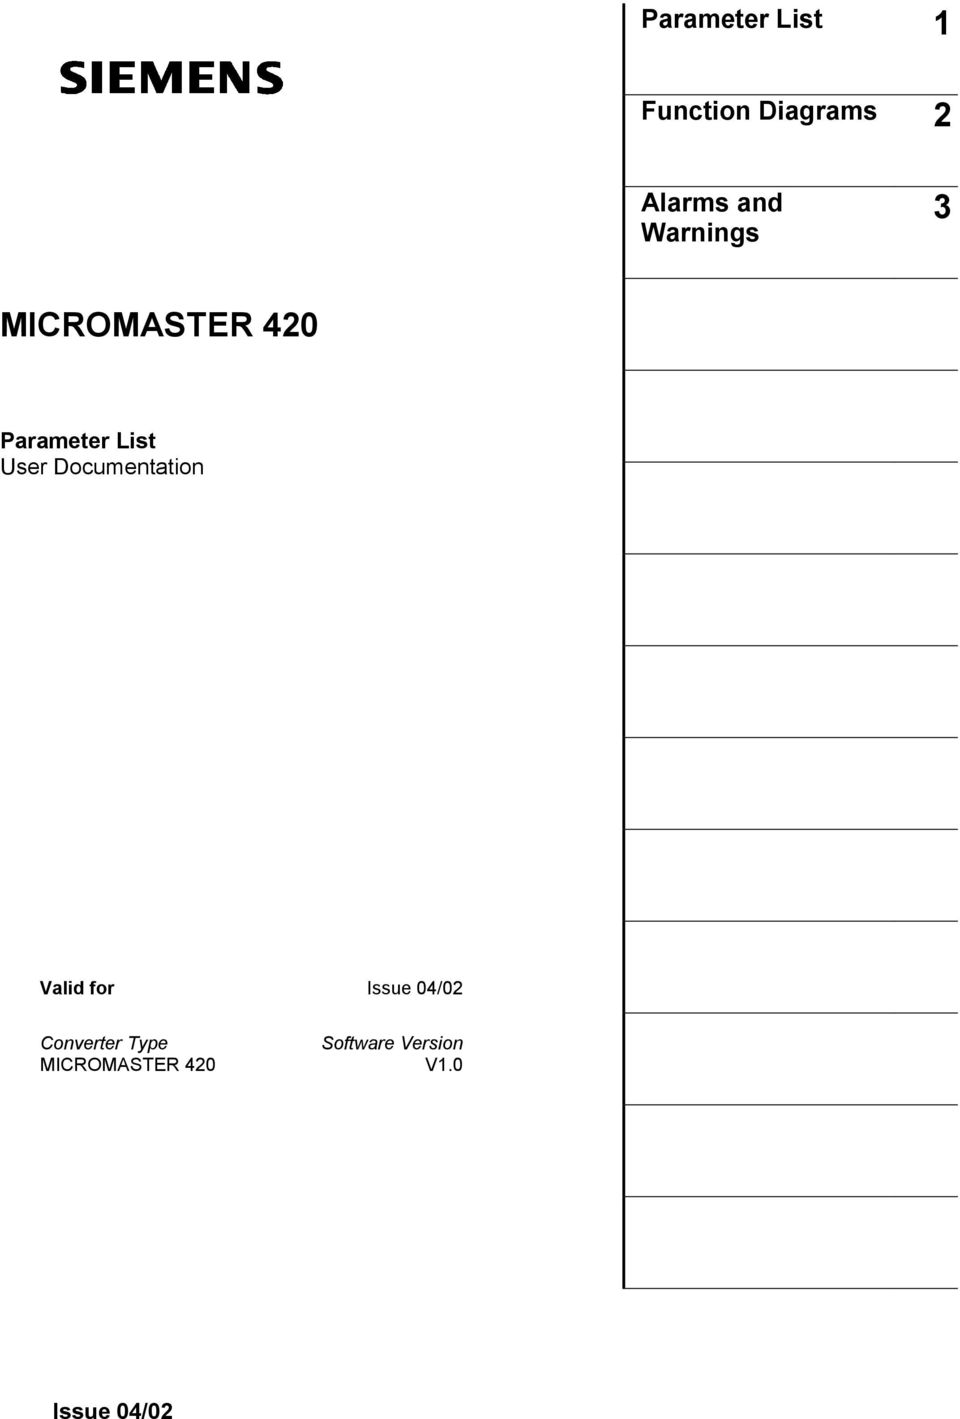 Micromaster 420 quick start guide